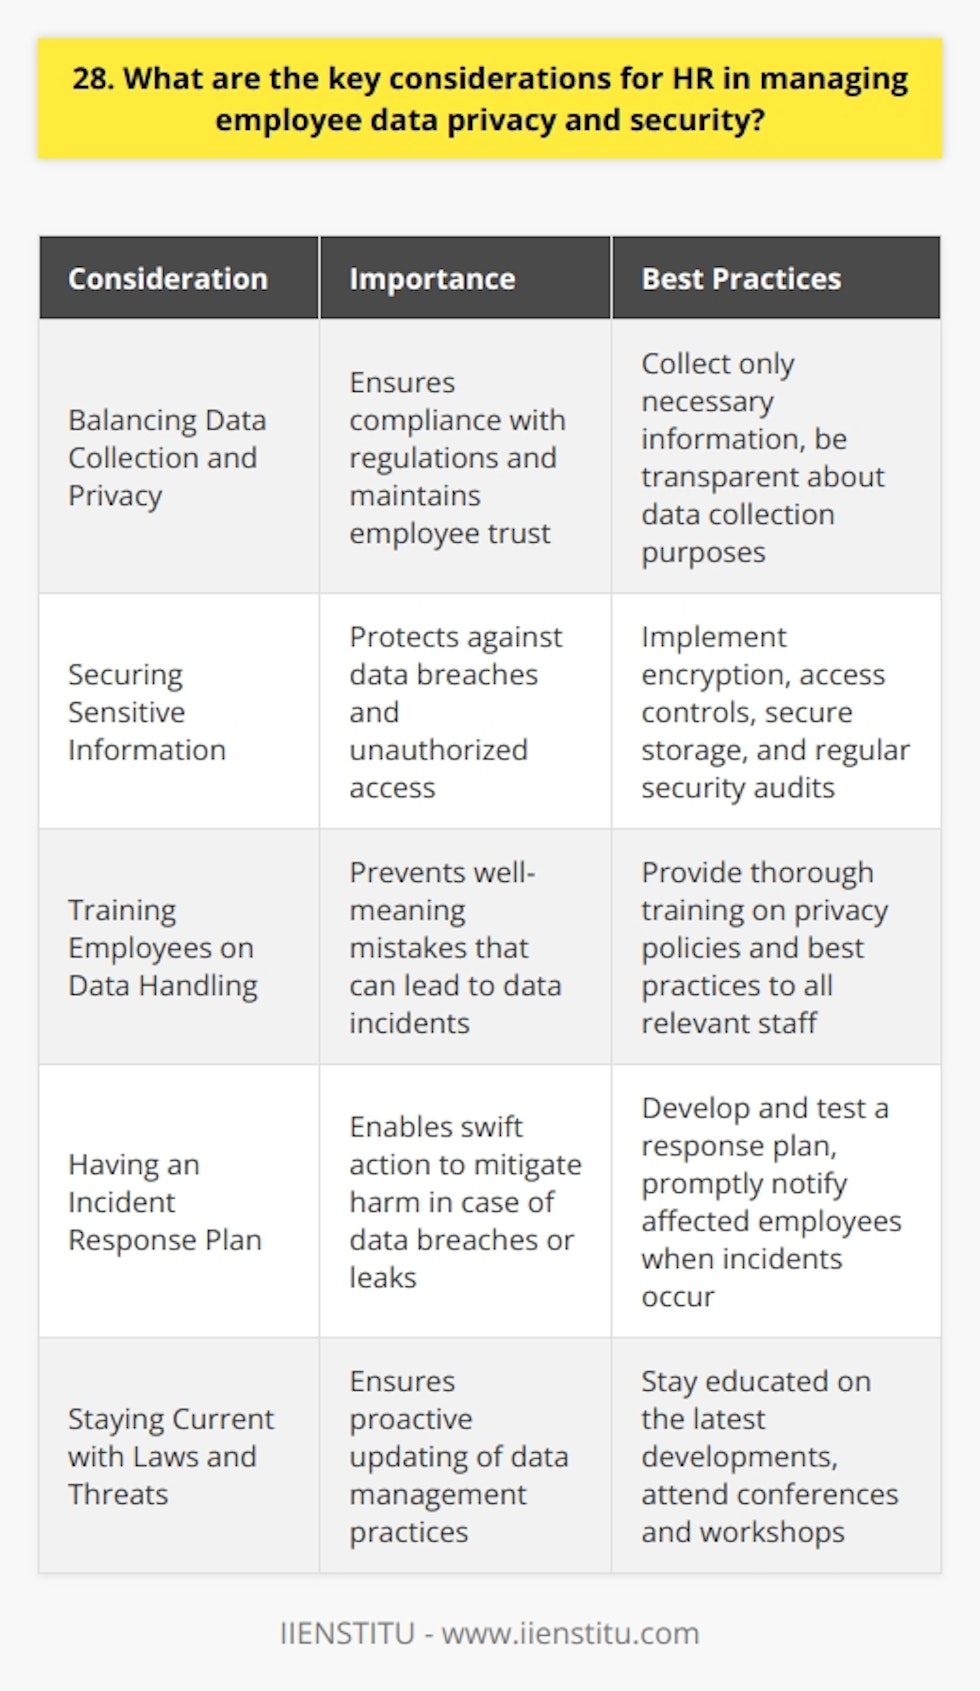 As an HR professional, I understand the critical importance of managing employee data privacy and security. Its not just about complying with laws and regulations, but also about maintaining trust with our workforce. Balancing Data Collection and Privacy We need to carefully consider what employee information is truly necessary to collect and store. Gathering excessive personal data not only increases privacy risks but can make employees uncomfortable. I always aim to be transparent about what data we collect and why. Securing Sensitive Information Any personal employee data we do retain must be rigorously safeguarded against breaches or unauthorized access. This means using encryption, access controls, secure storage, and other technical security measures. Regular security audits are crucial for staying vigilant. Training Employees on Data Handling All HR staff and managers who handle employee information need thorough training on privacy policies and best practices. Even well-meaning mistakes by untrained personnel can lead to serious data incidents. Ive learned that investing in workforce education makes a huge difference. Having an Incident Response Plan Despite our best efforts, data breaches or leaks can still happen. Being prepared with a tested incident response plan ensures we can take swift action to mitigate harm. Quickly notifying affected employees is essential for maintaining trust. Staying Current with Laws and Threats Data privacy regulations and cybersecurity threats are constantly evolving. I make it a priority to stay educated on the latest developments. Attending conferences and workshops helps me proactively update our data management practices.